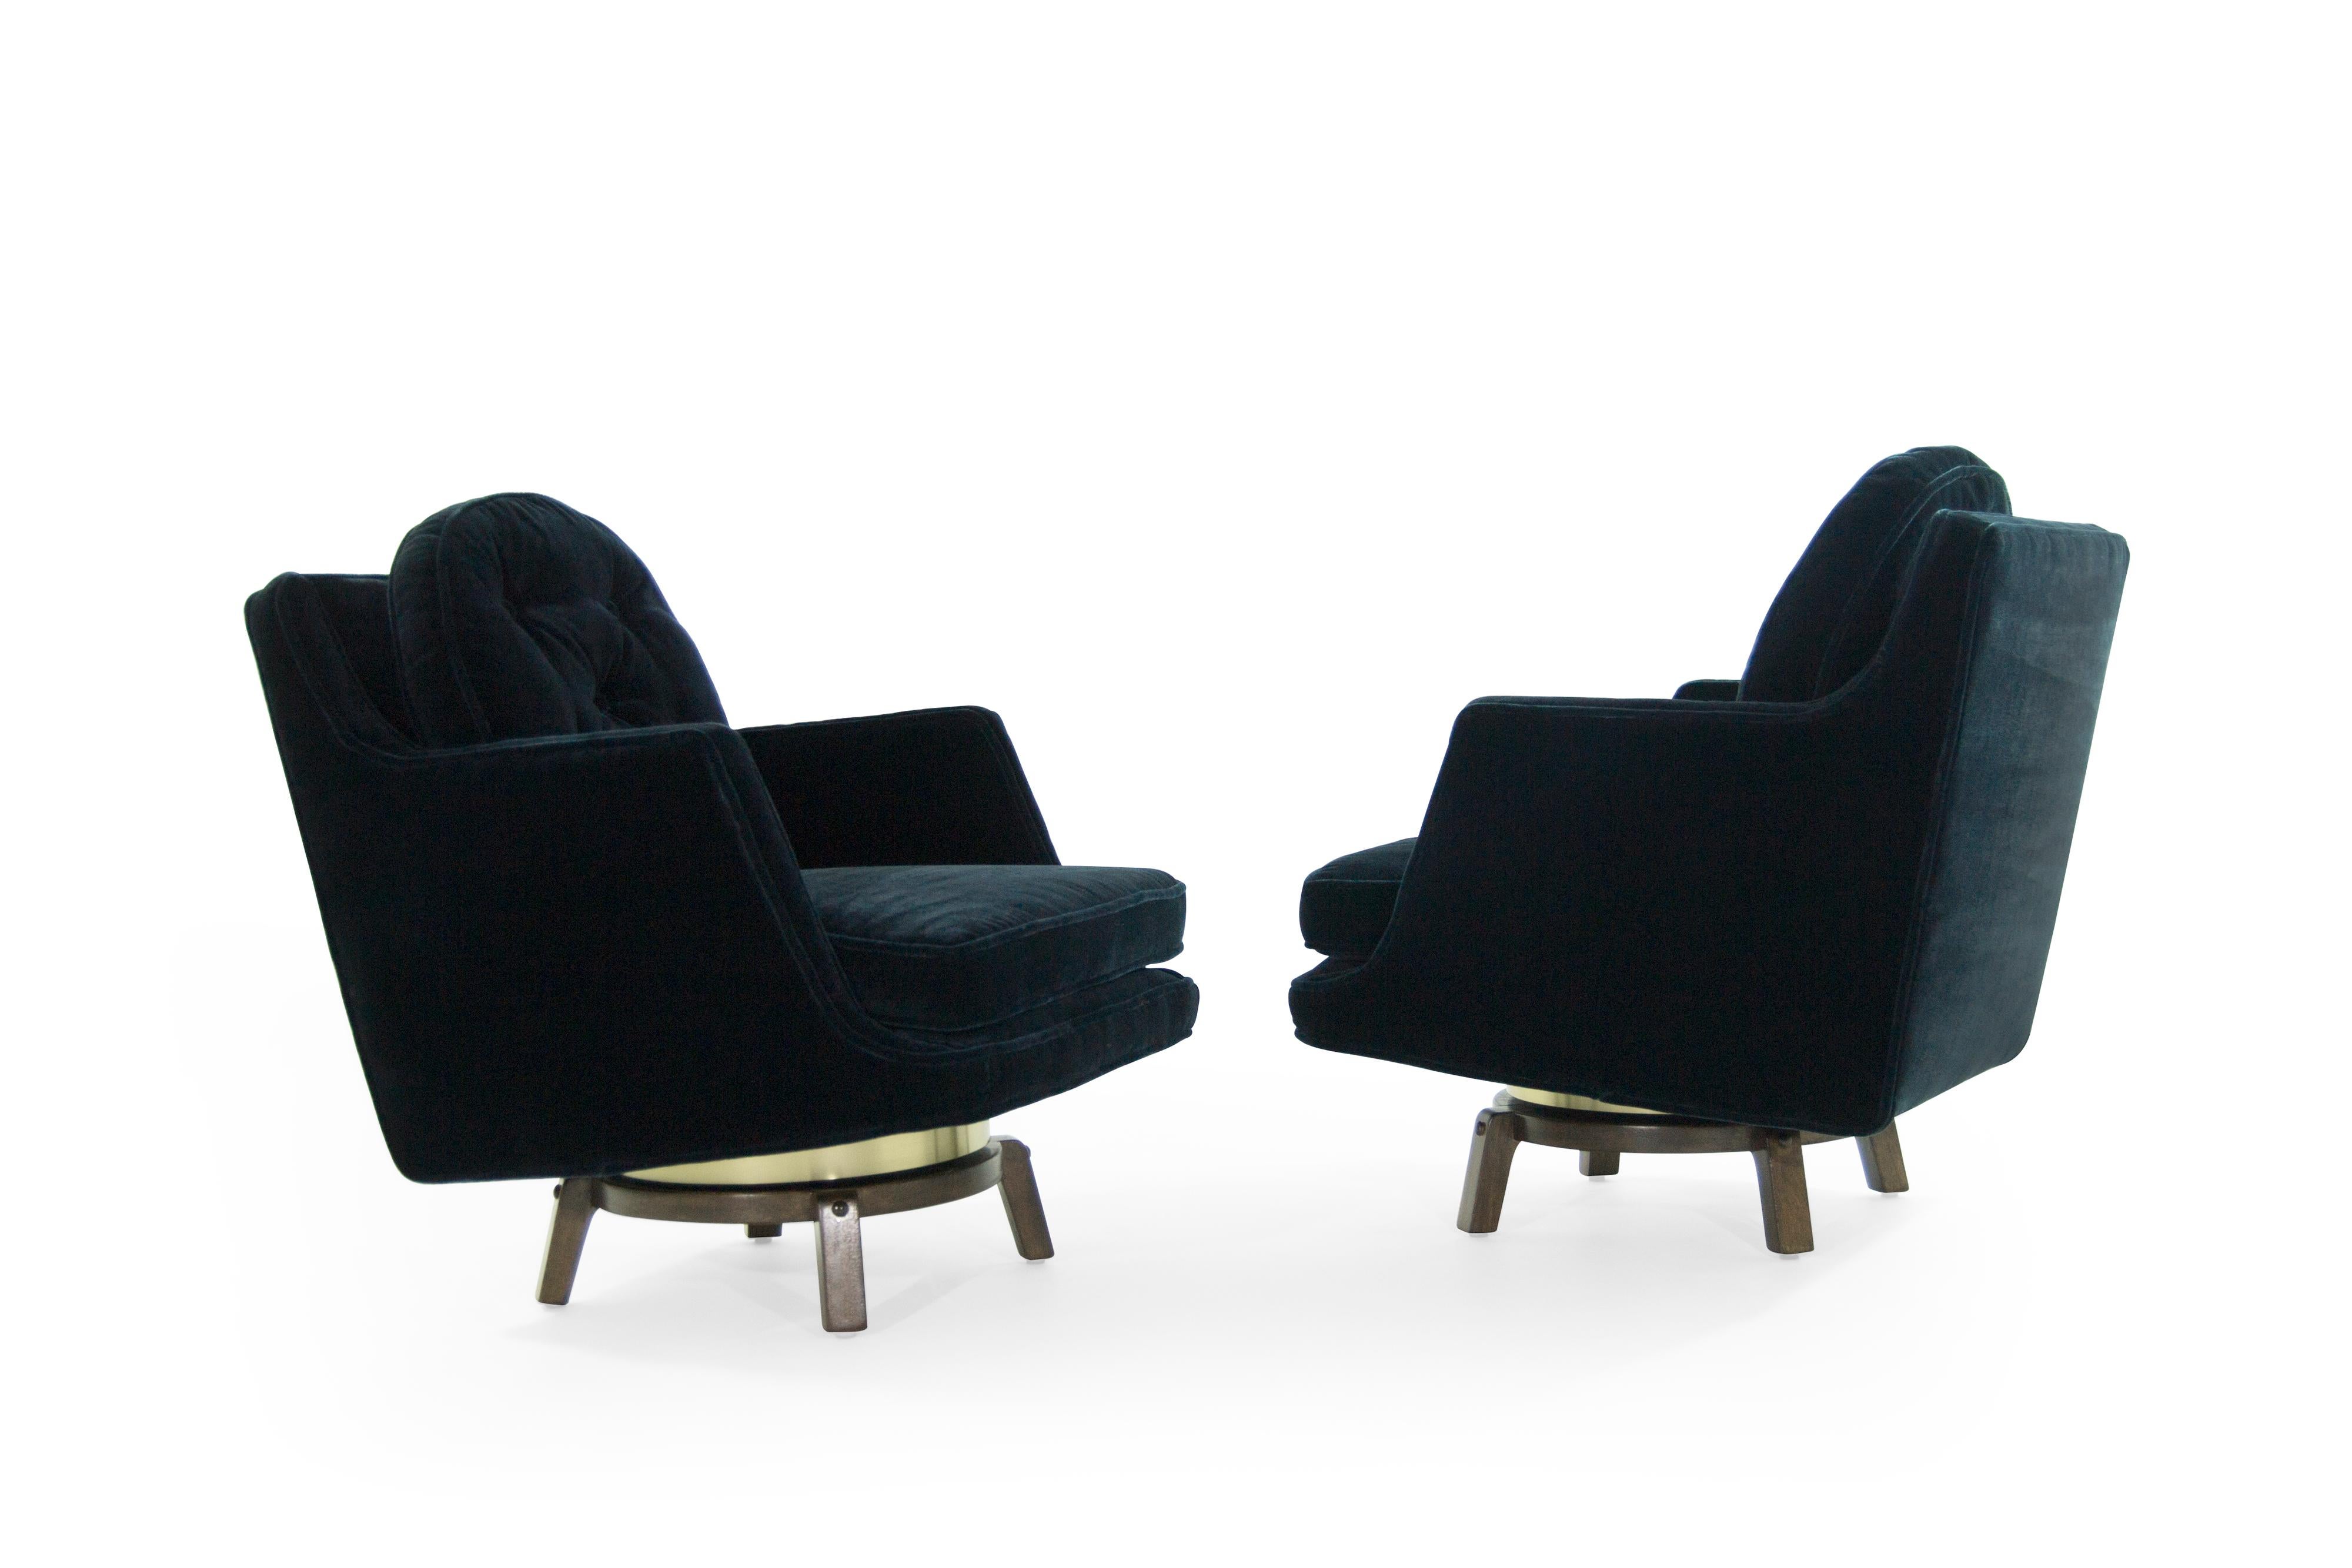 Mid-Century Modern Brass Accented Swivel Chairs by Edward Wormley for Dunbar, 1950s